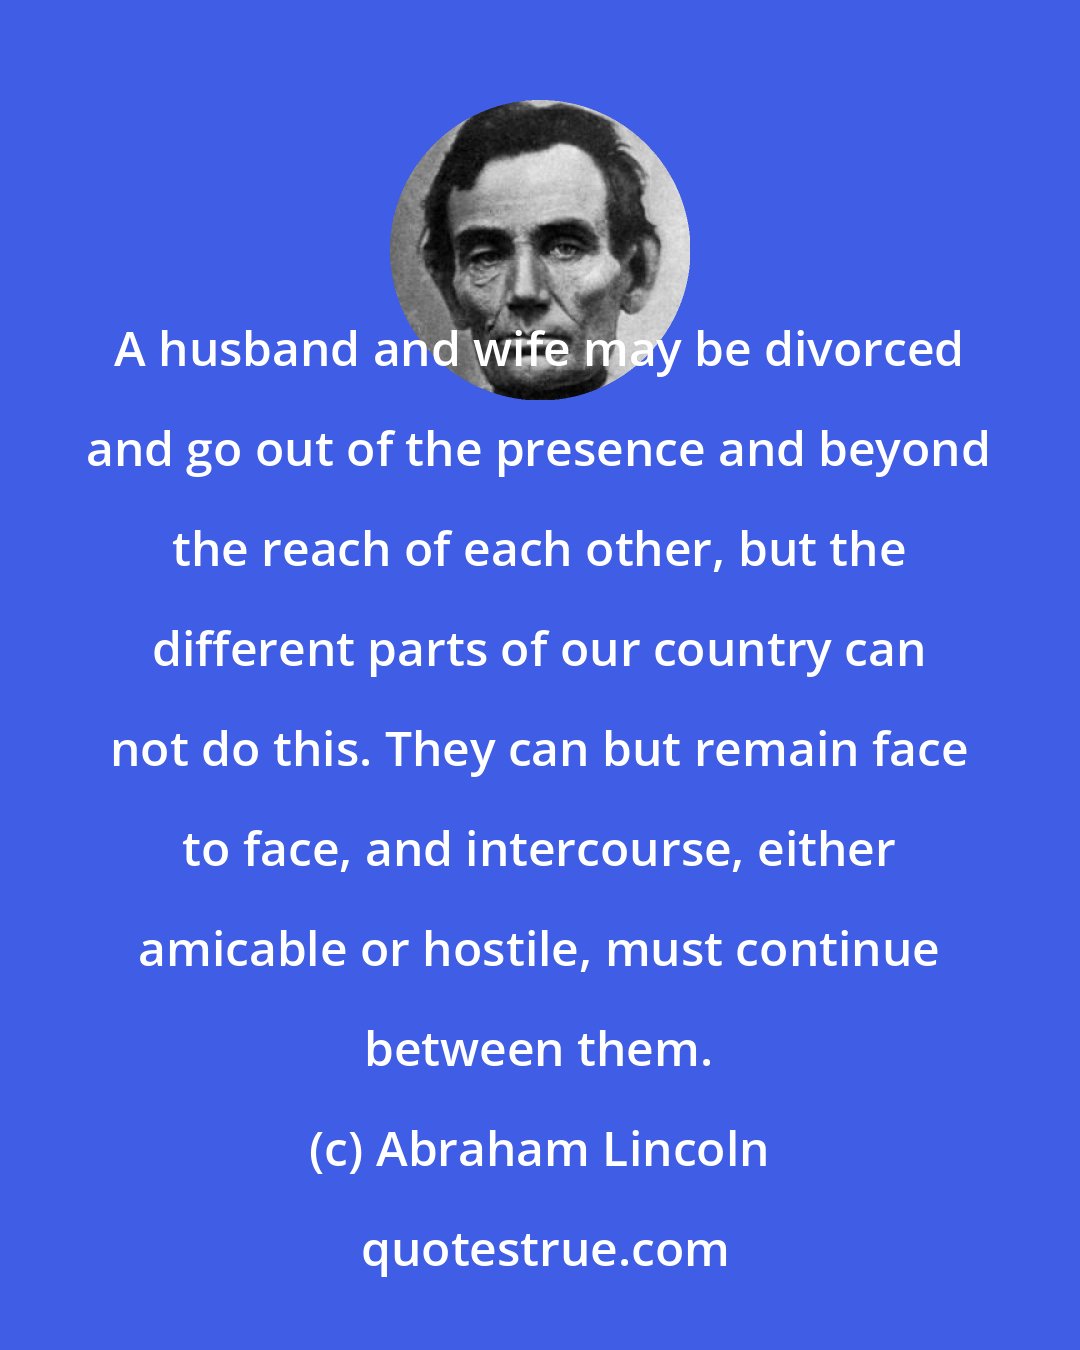 Abraham Lincoln: A husband and wife may be divorced and go out of the presence and beyond the reach of each other, but the different parts of our country can not do this. They can but remain face to face, and intercourse, either amicable or hostile, must continue between them.